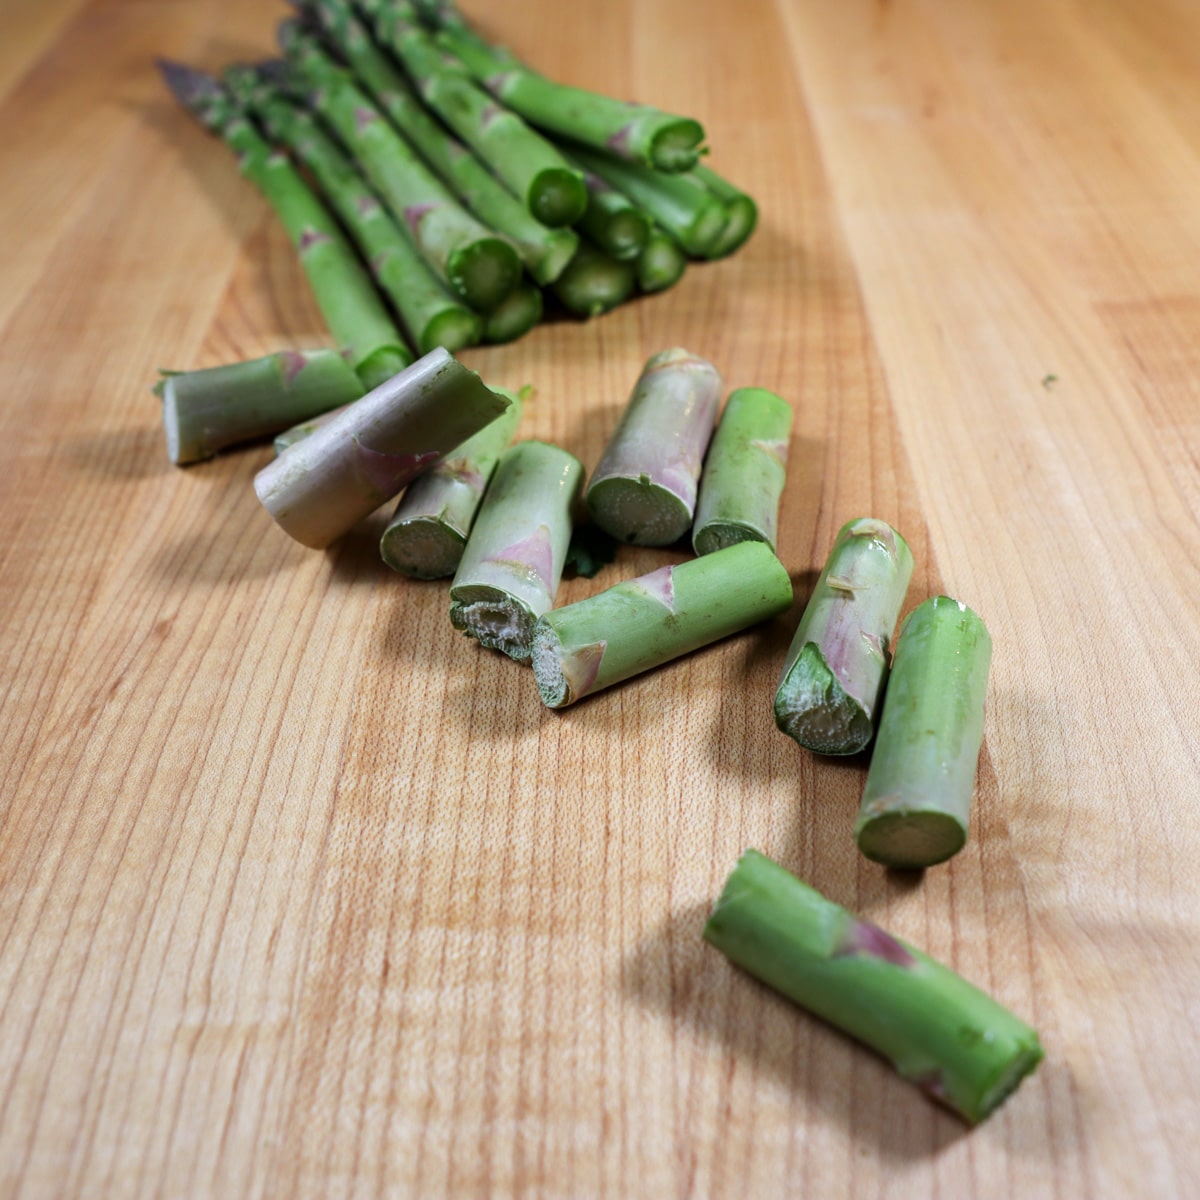 snapping asparagus by hand